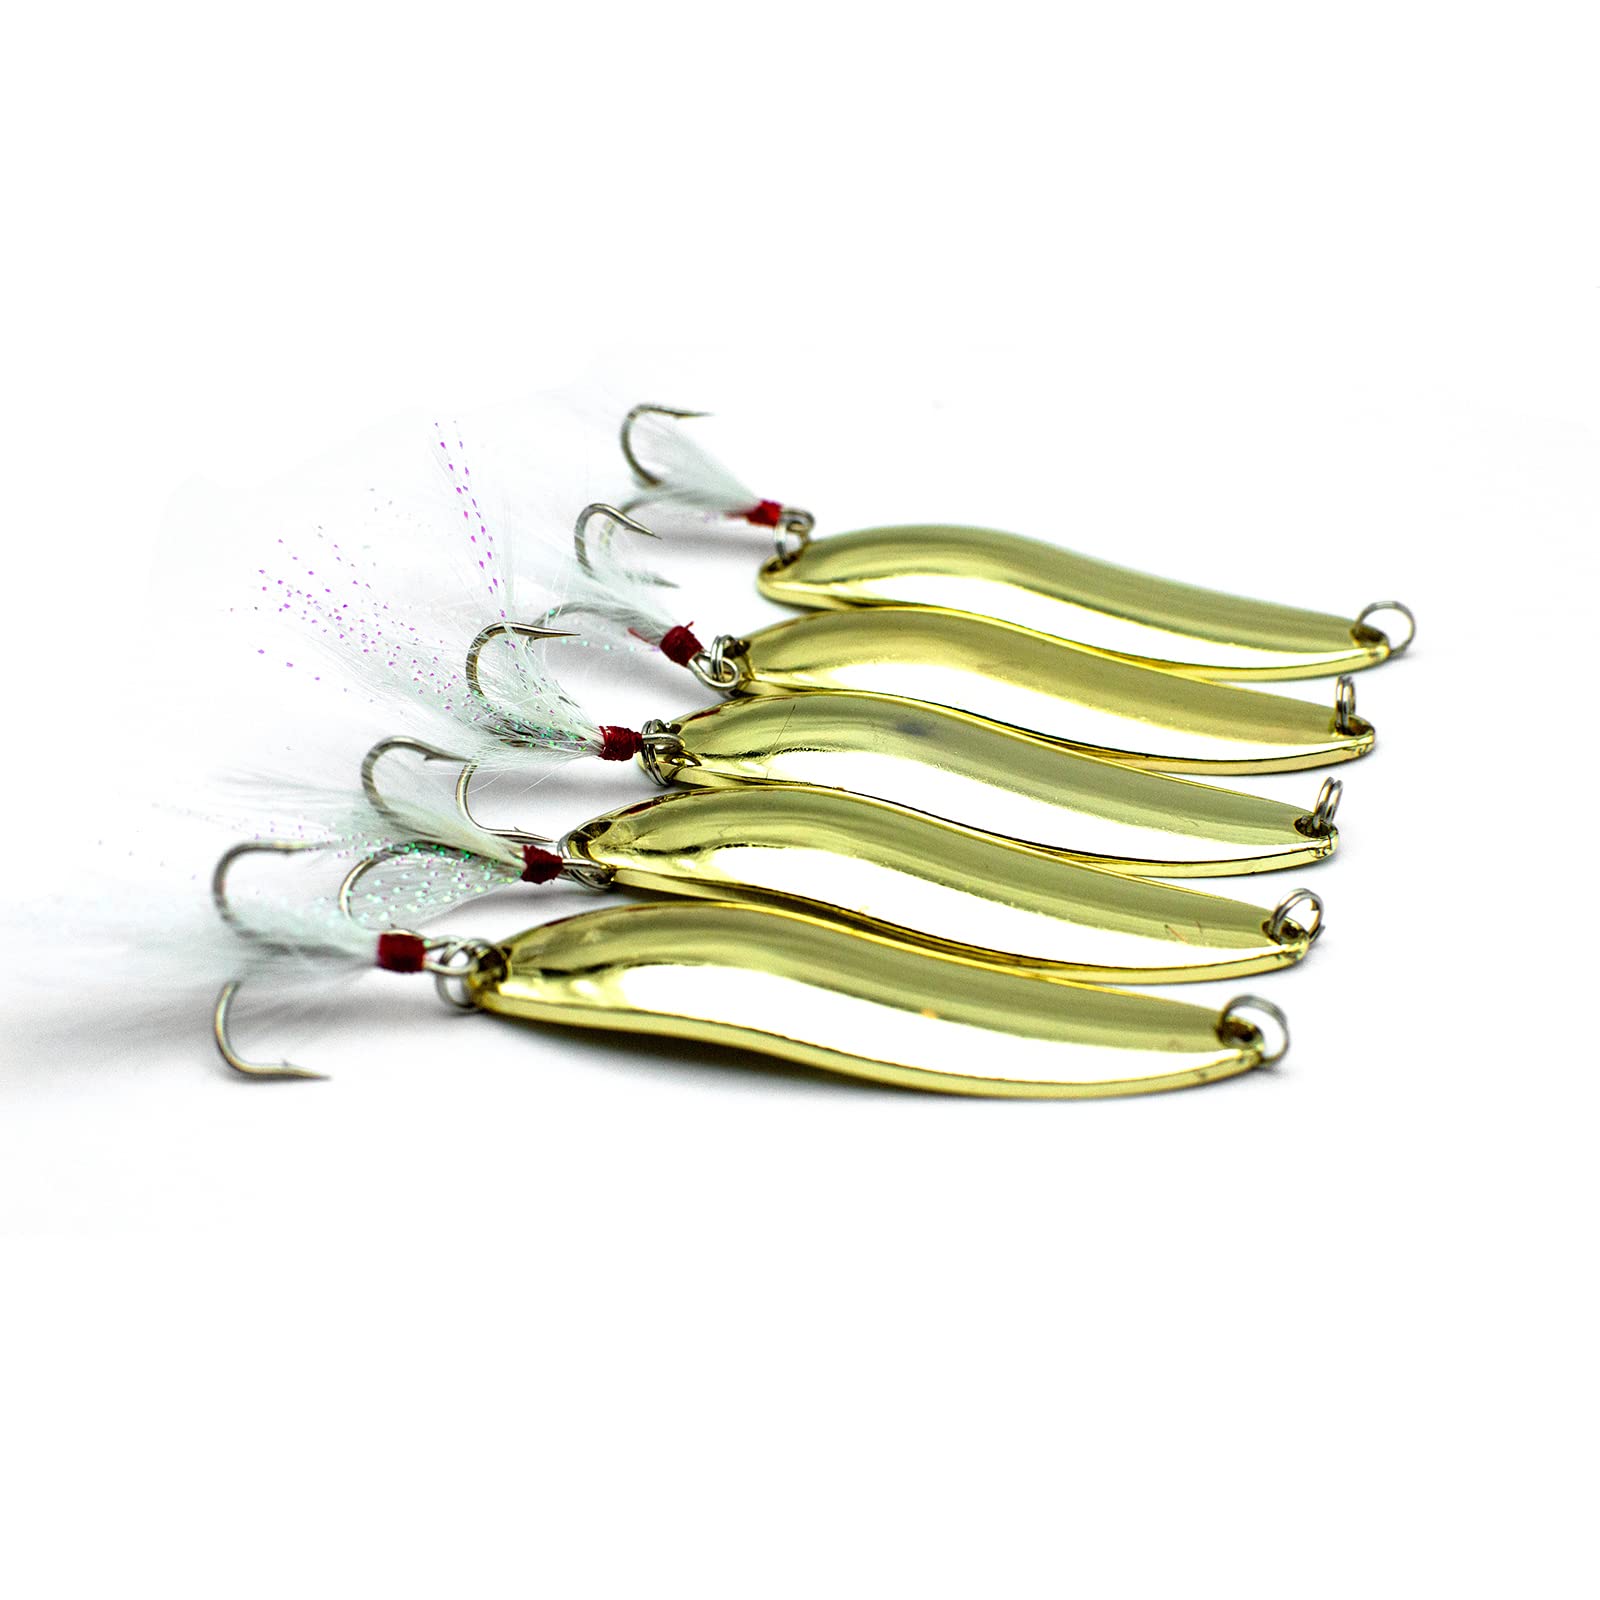 10pcs Fishing Spoon Lures & Baits Durable Hard Metal Spinner Baits for  Fishing Equipment Attracting Fish